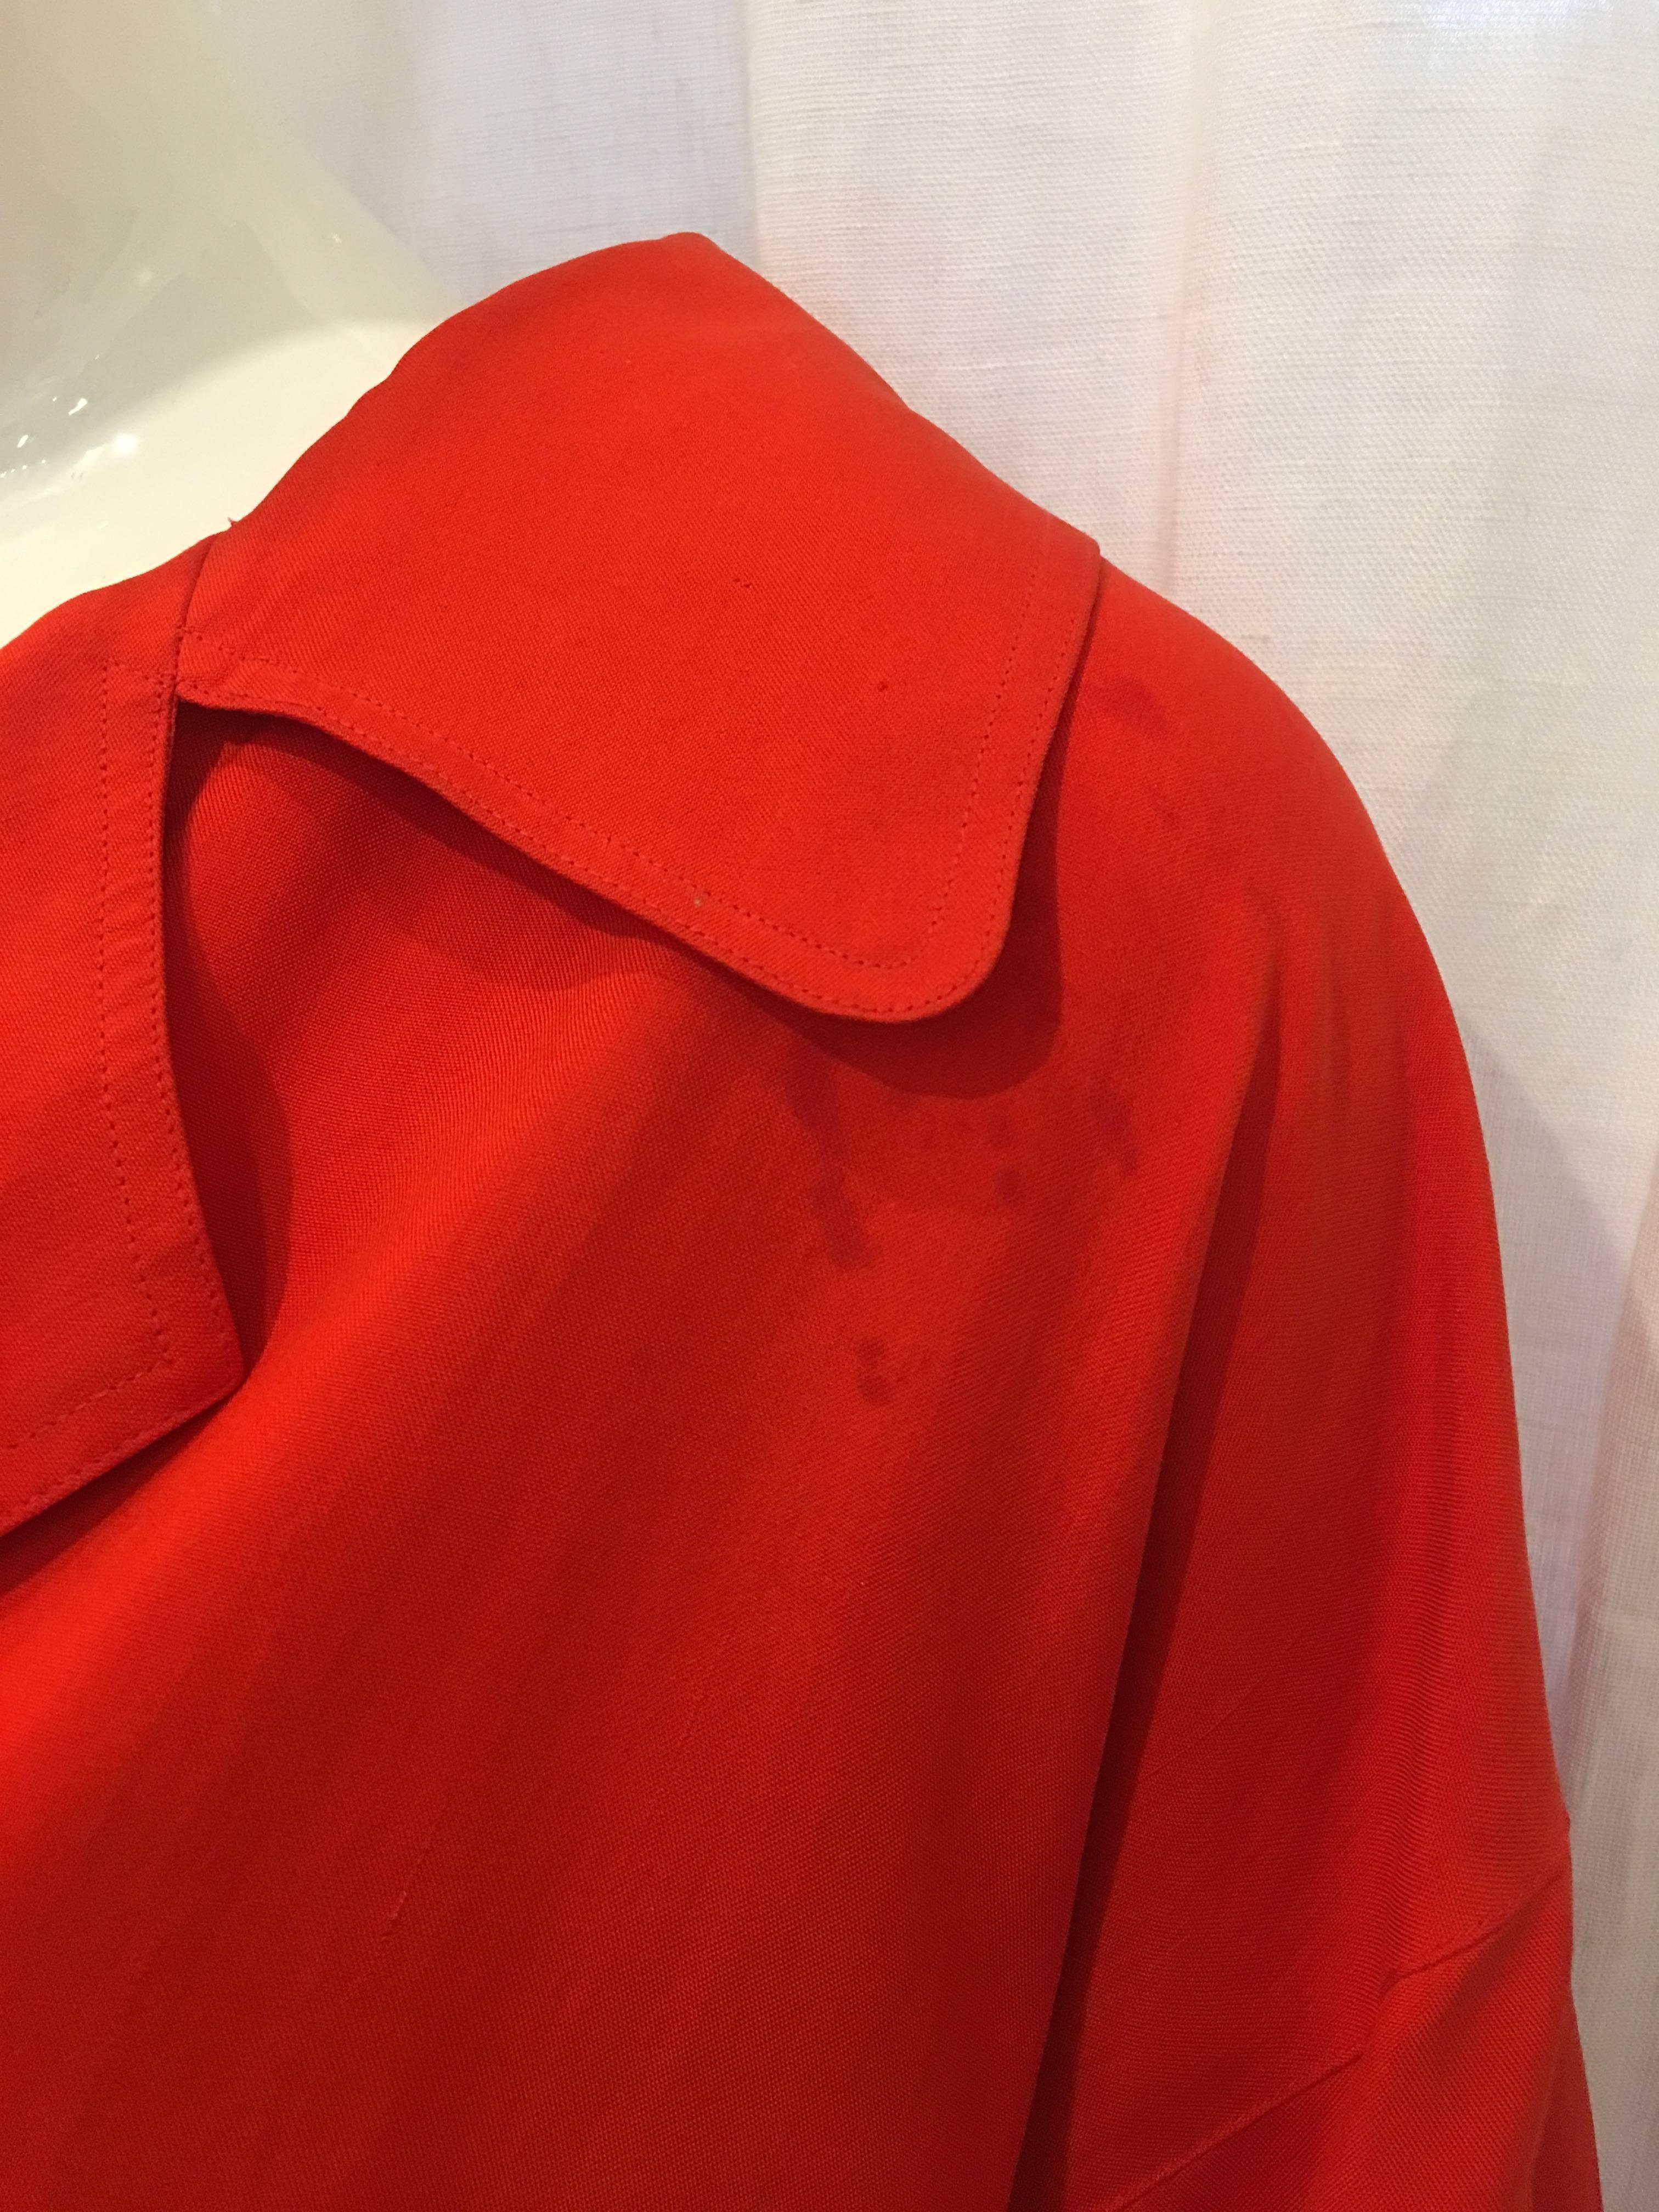 Beautiful red silk lightweight jacket. Double breasted style. Eye-catching yet simple. Perfect for spring weather or a layer during colder weather. Perfect vibrant shade of red. Some staining, please note photos.